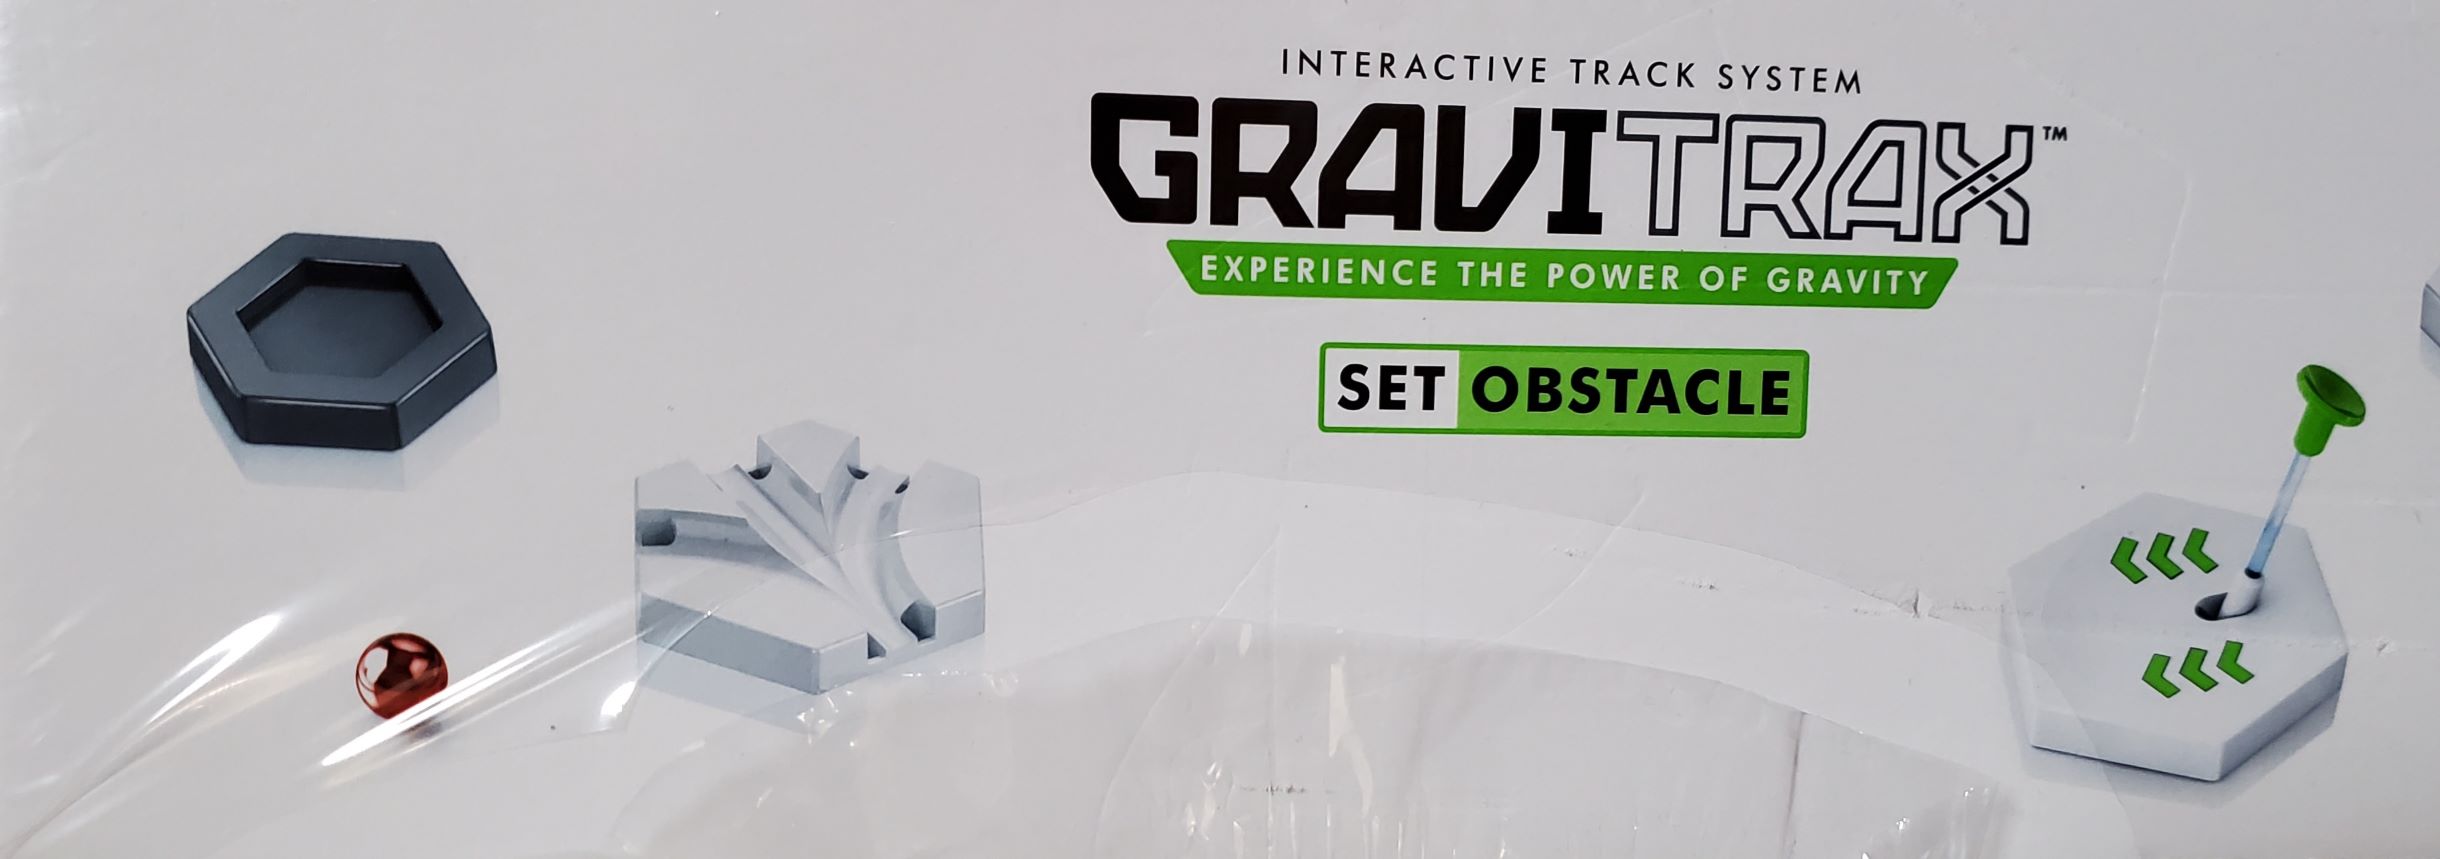 Ravensburger Collections The Set Course Obstacle Gravitrax Puzzle –